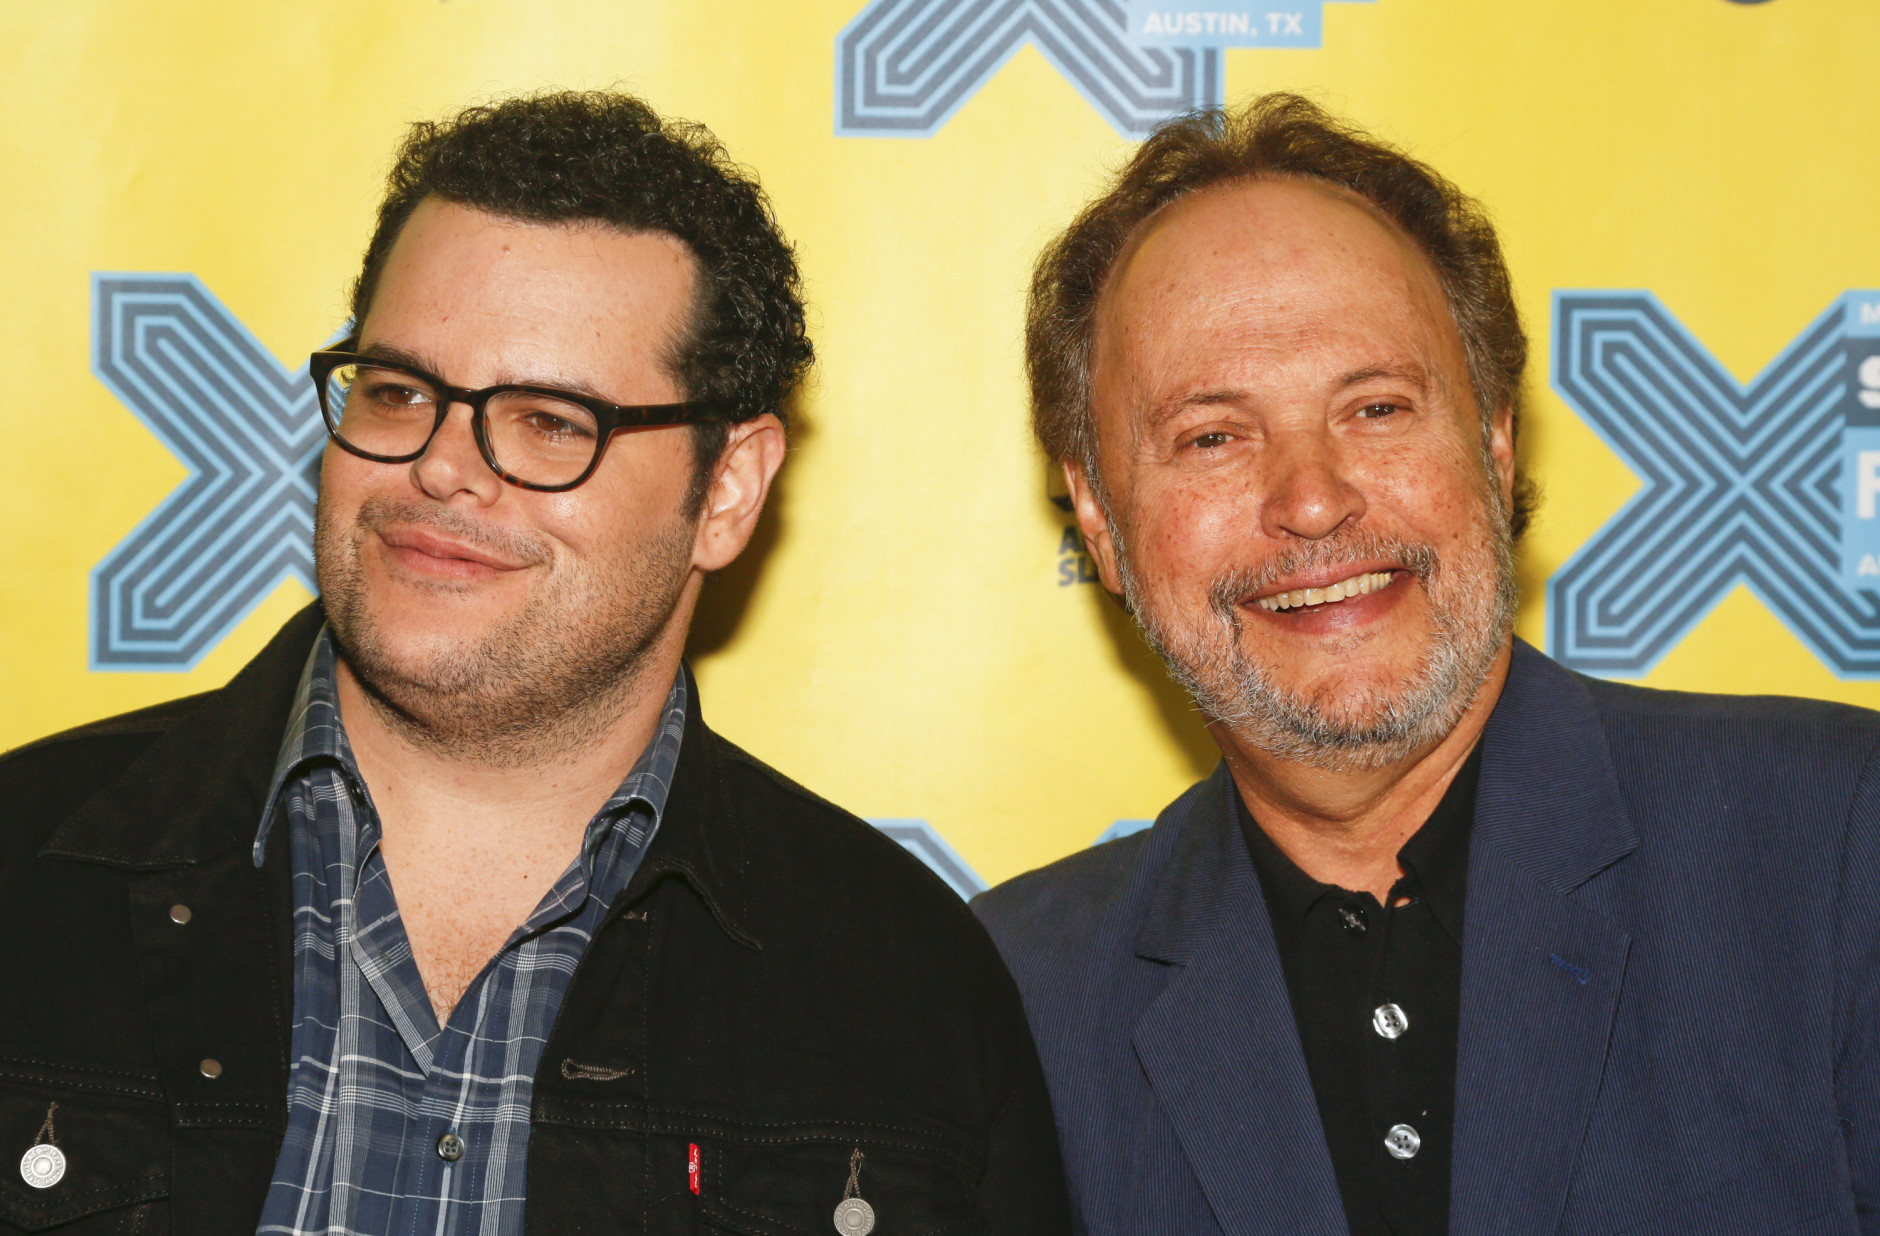 Josh Gad, left, and Billy Crystal walk the red carpet for "The Comedians" during the South by Southwest Film Festival on Sunday, March 15, 2015 in Austin, Texas. (Photo by Jack Plunkett/Invision/AP)